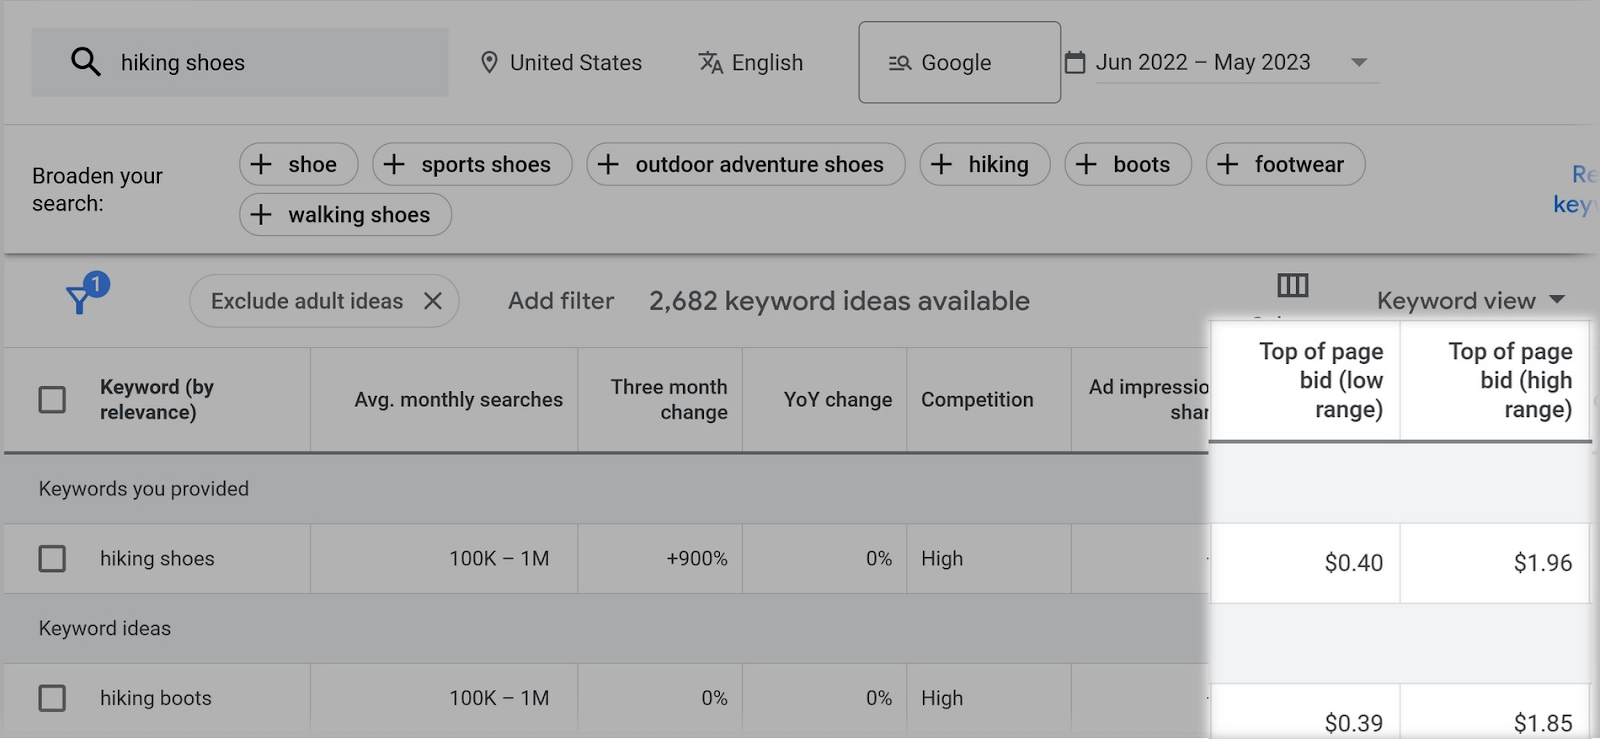 Google Keyword Planner shows two columns with top of page bid (low range and high range)